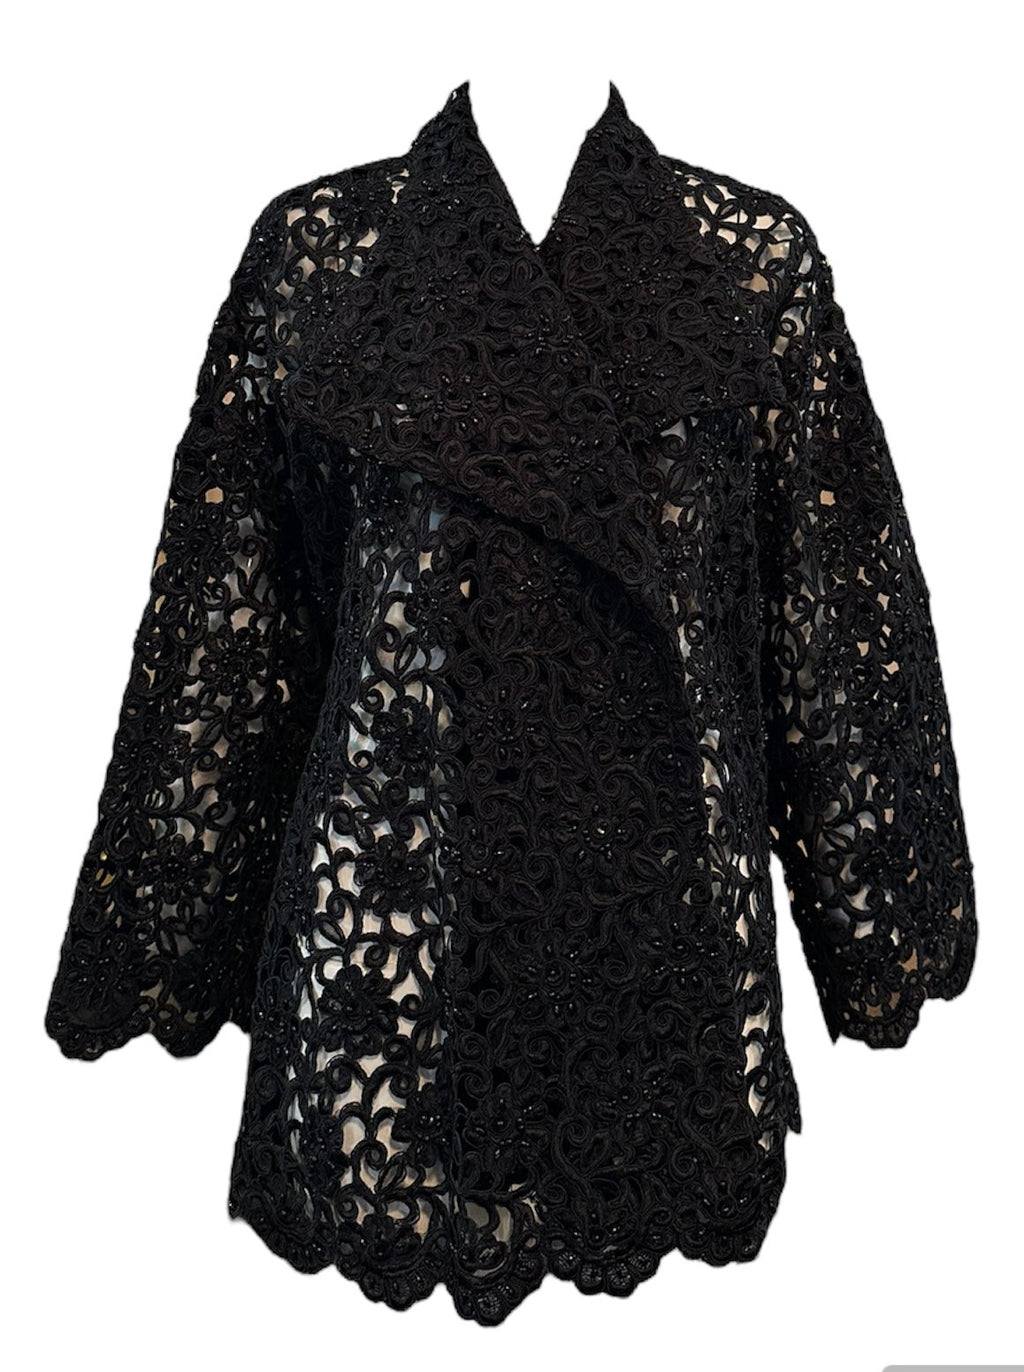 Gorgeous Black Cutwork Lace Evening Jacket Dotted with Beading FRONT 1 of 6